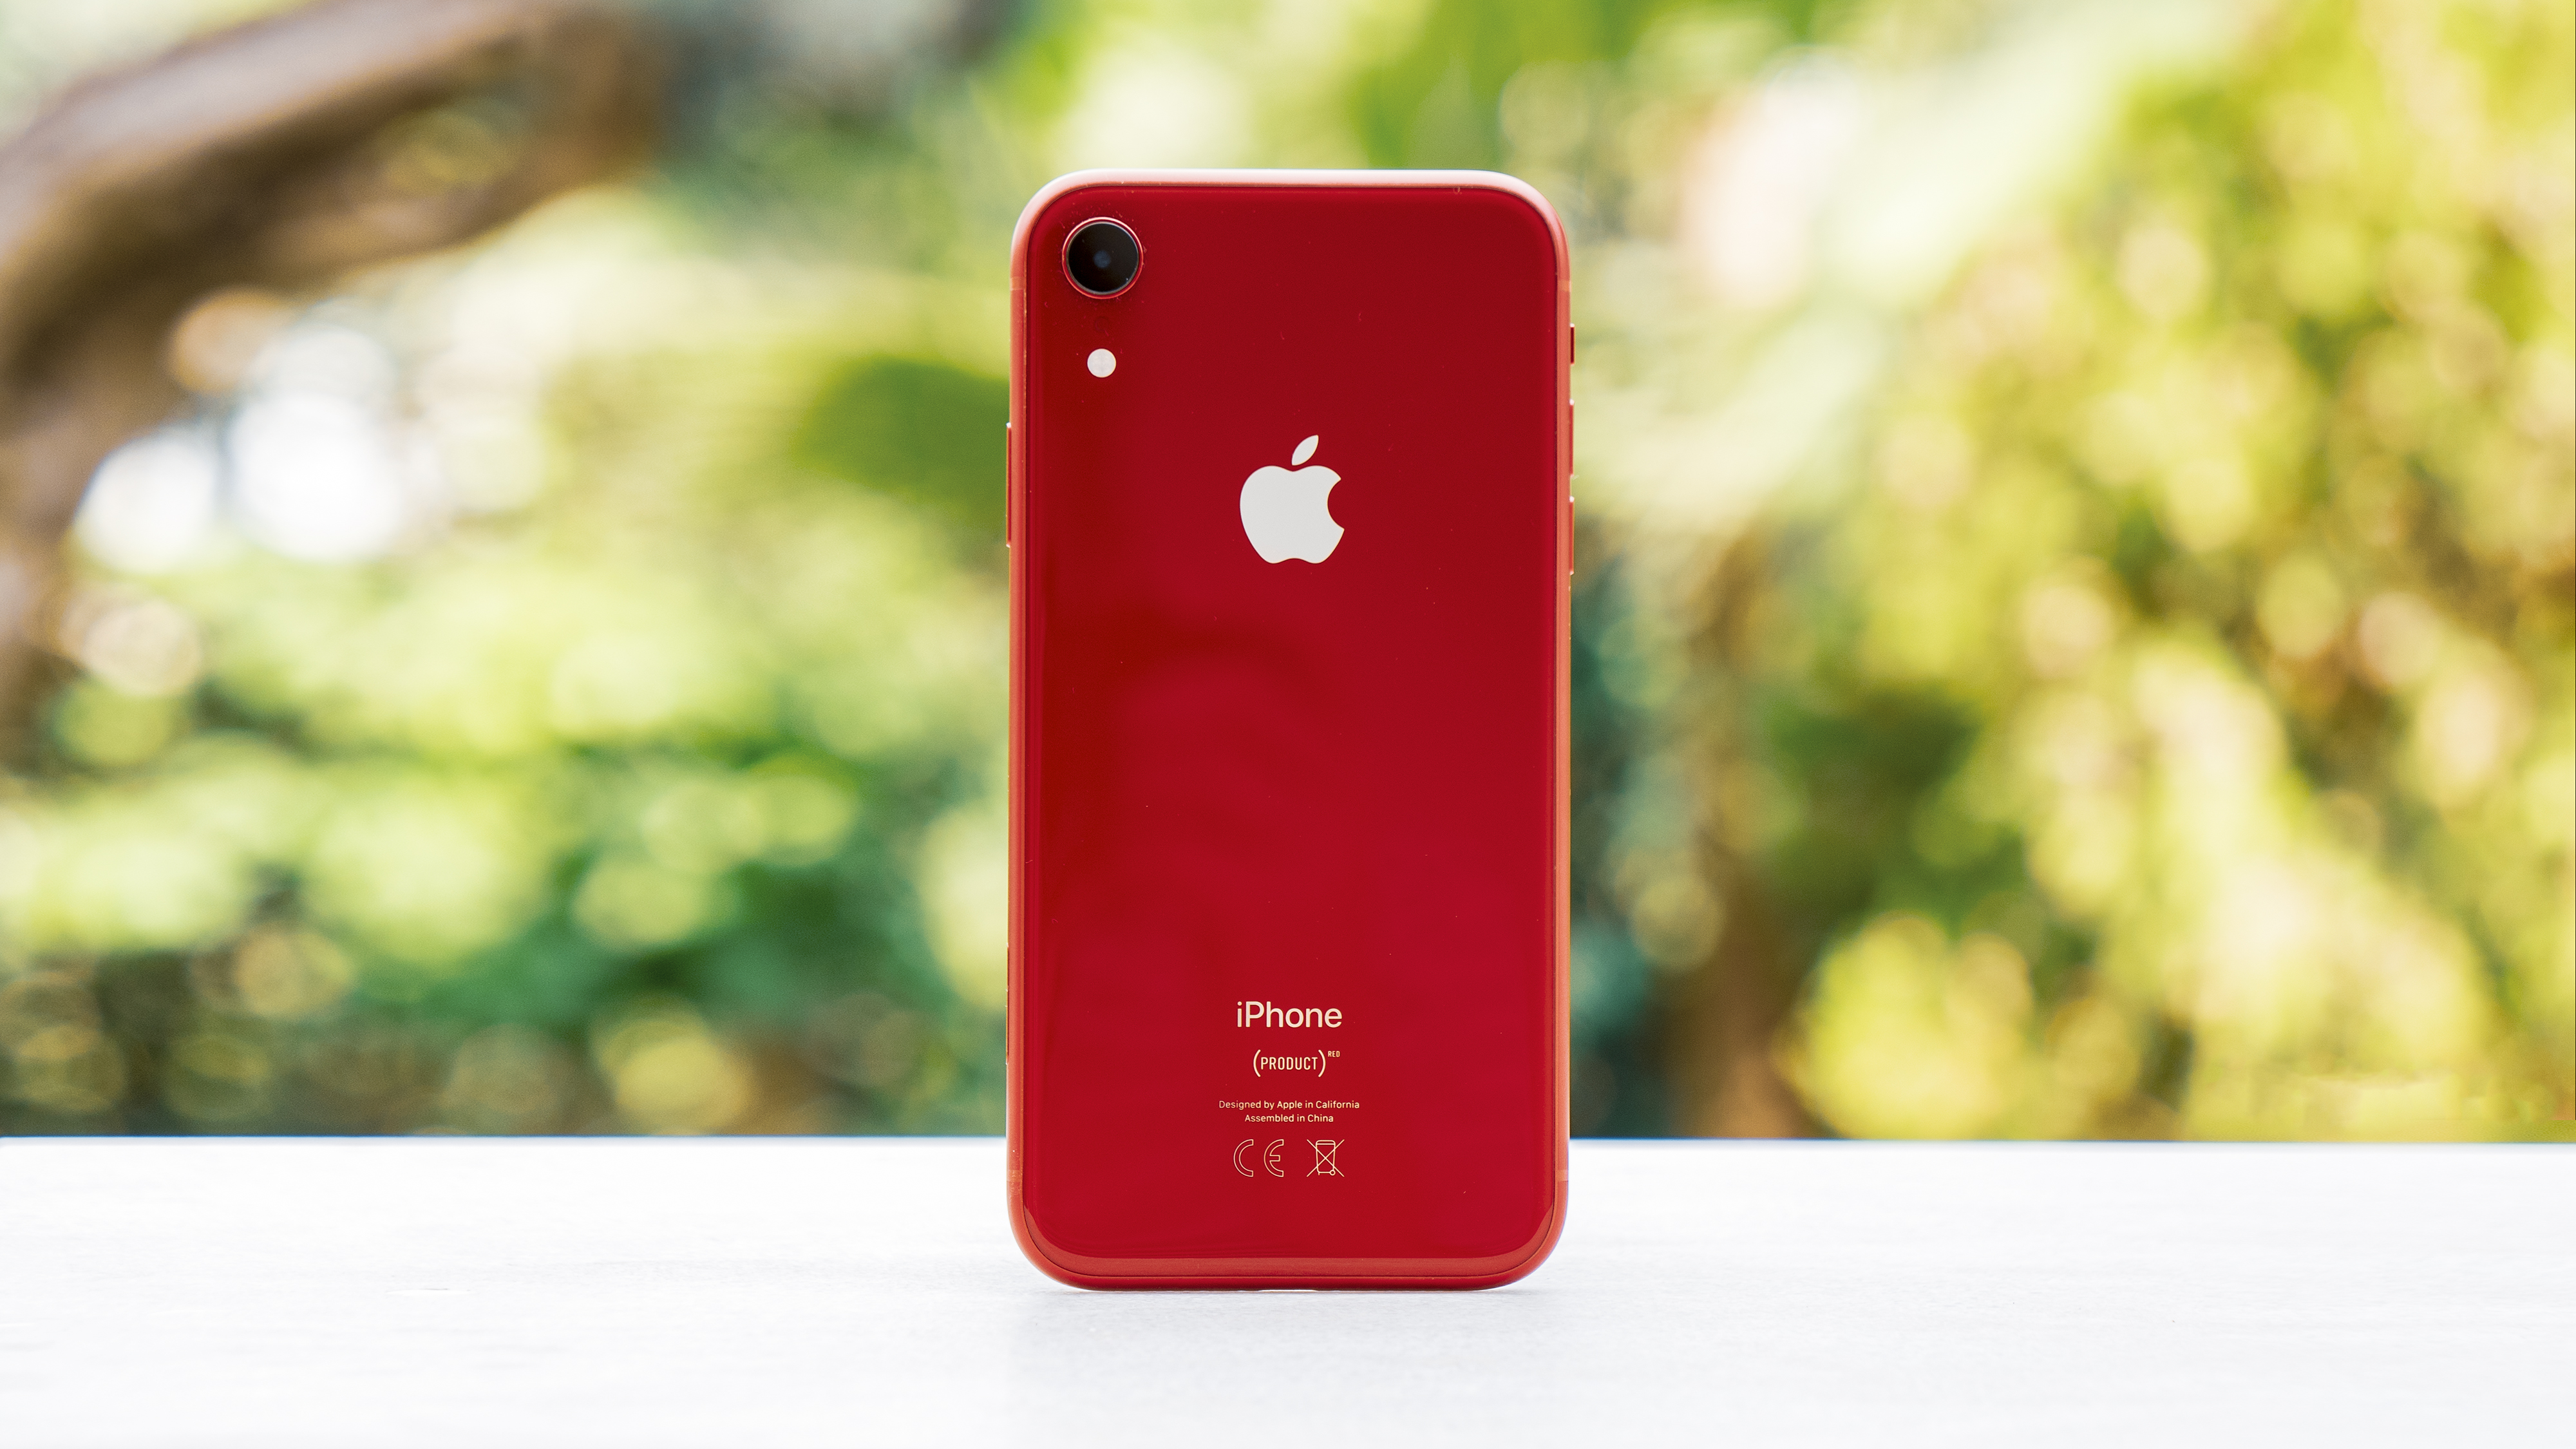 An iPhone XR in red, from the back